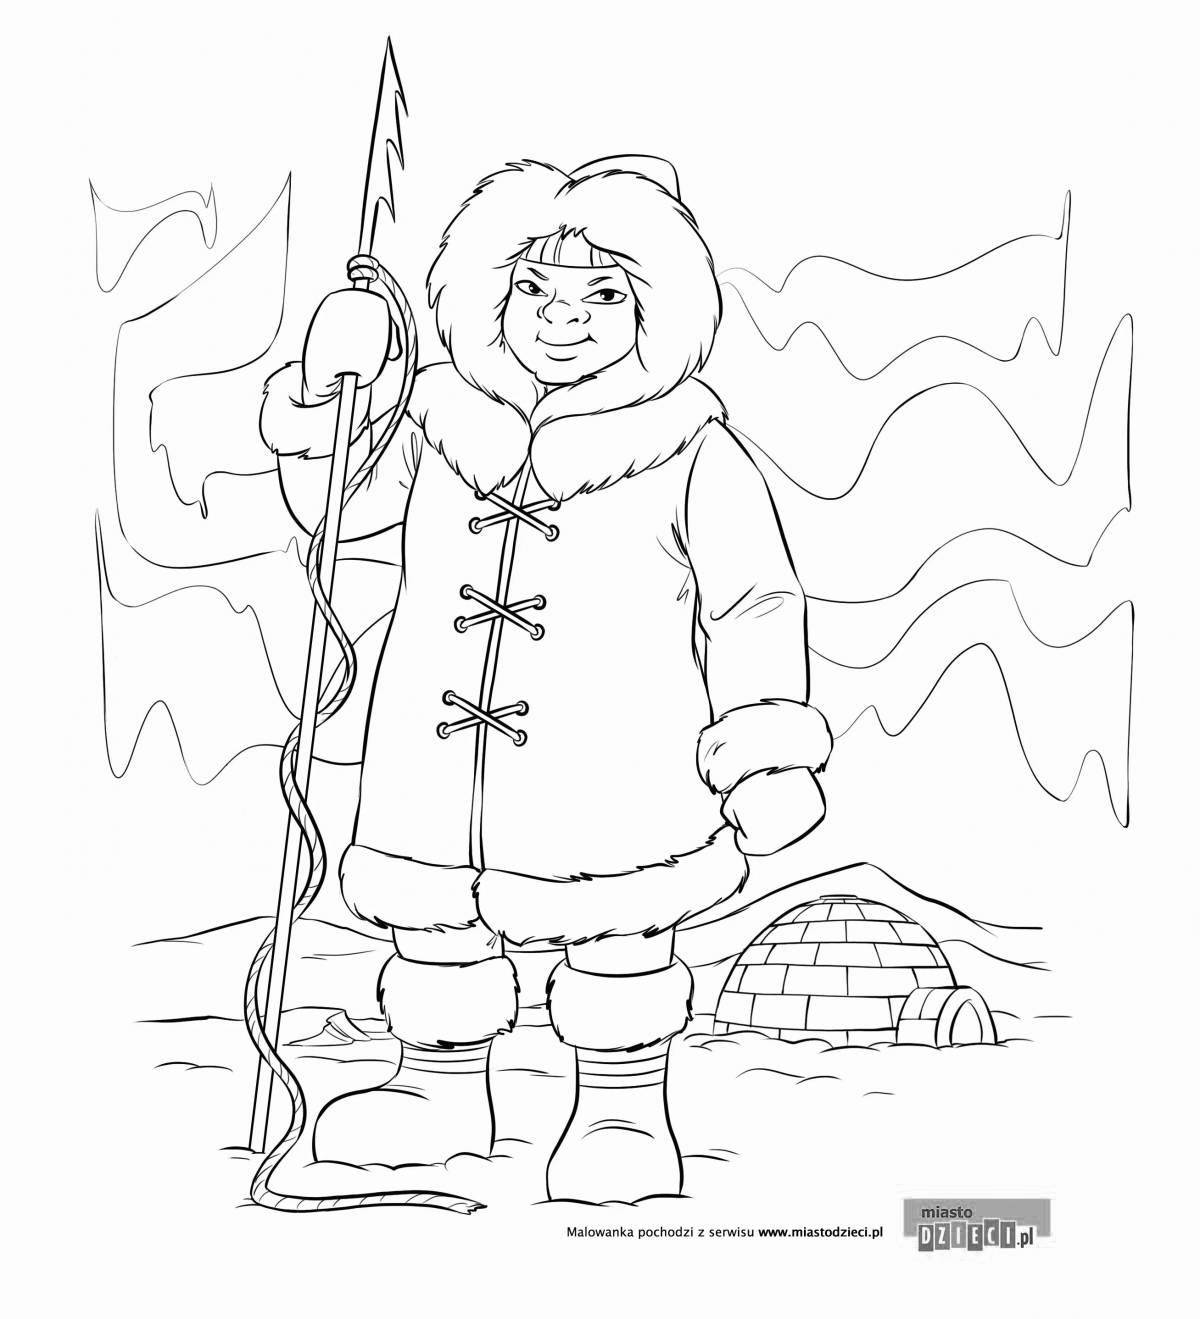 Charming coloring book for children of the north